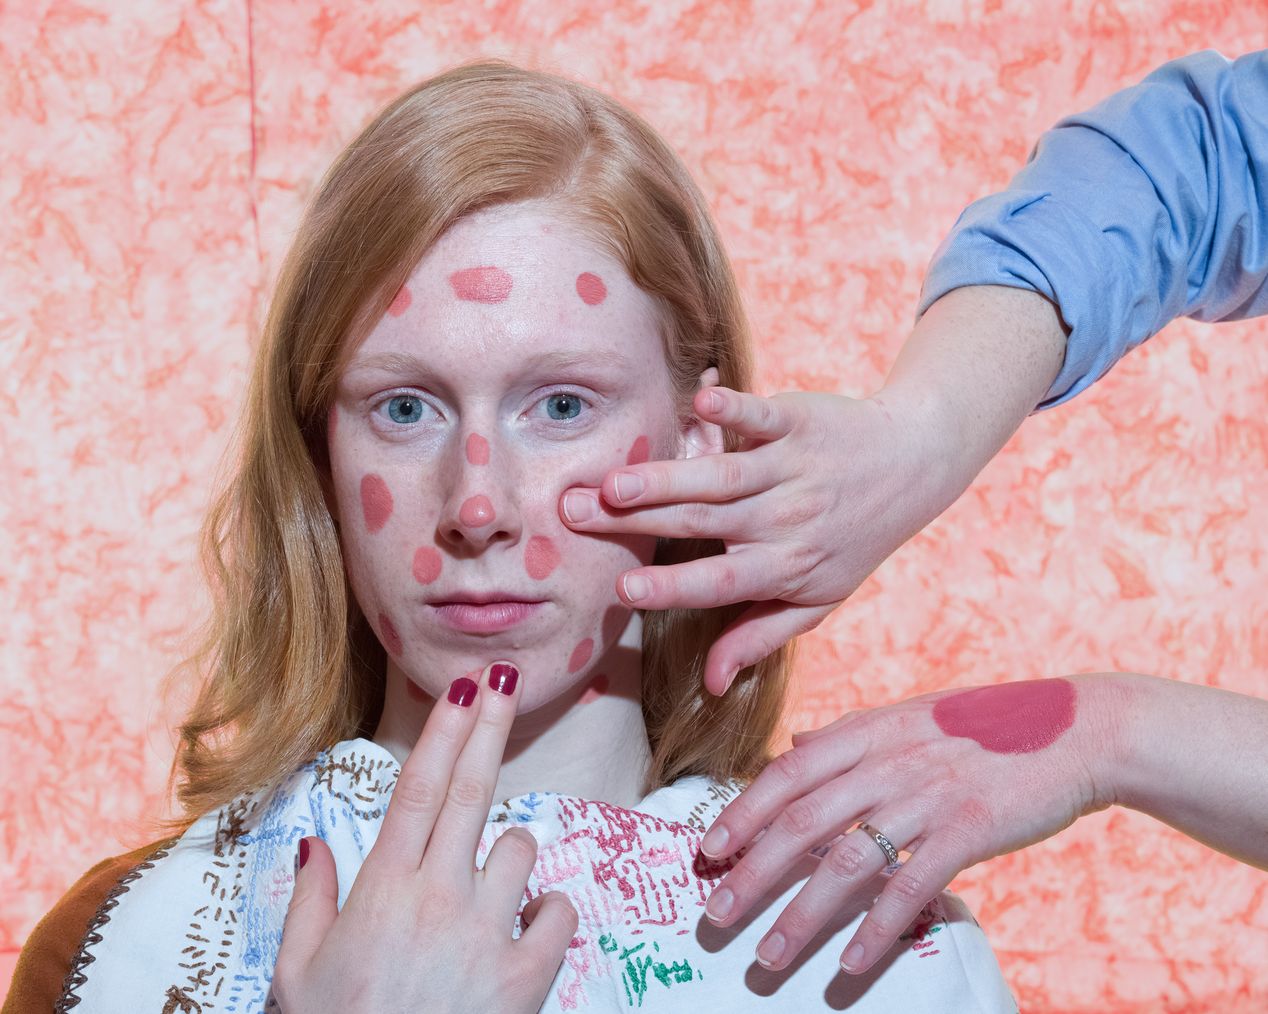 Makeup artist is applying pink dots of paint on a model's face, art photography, Ilona Szwarc, contemporary Los Angeles artist.